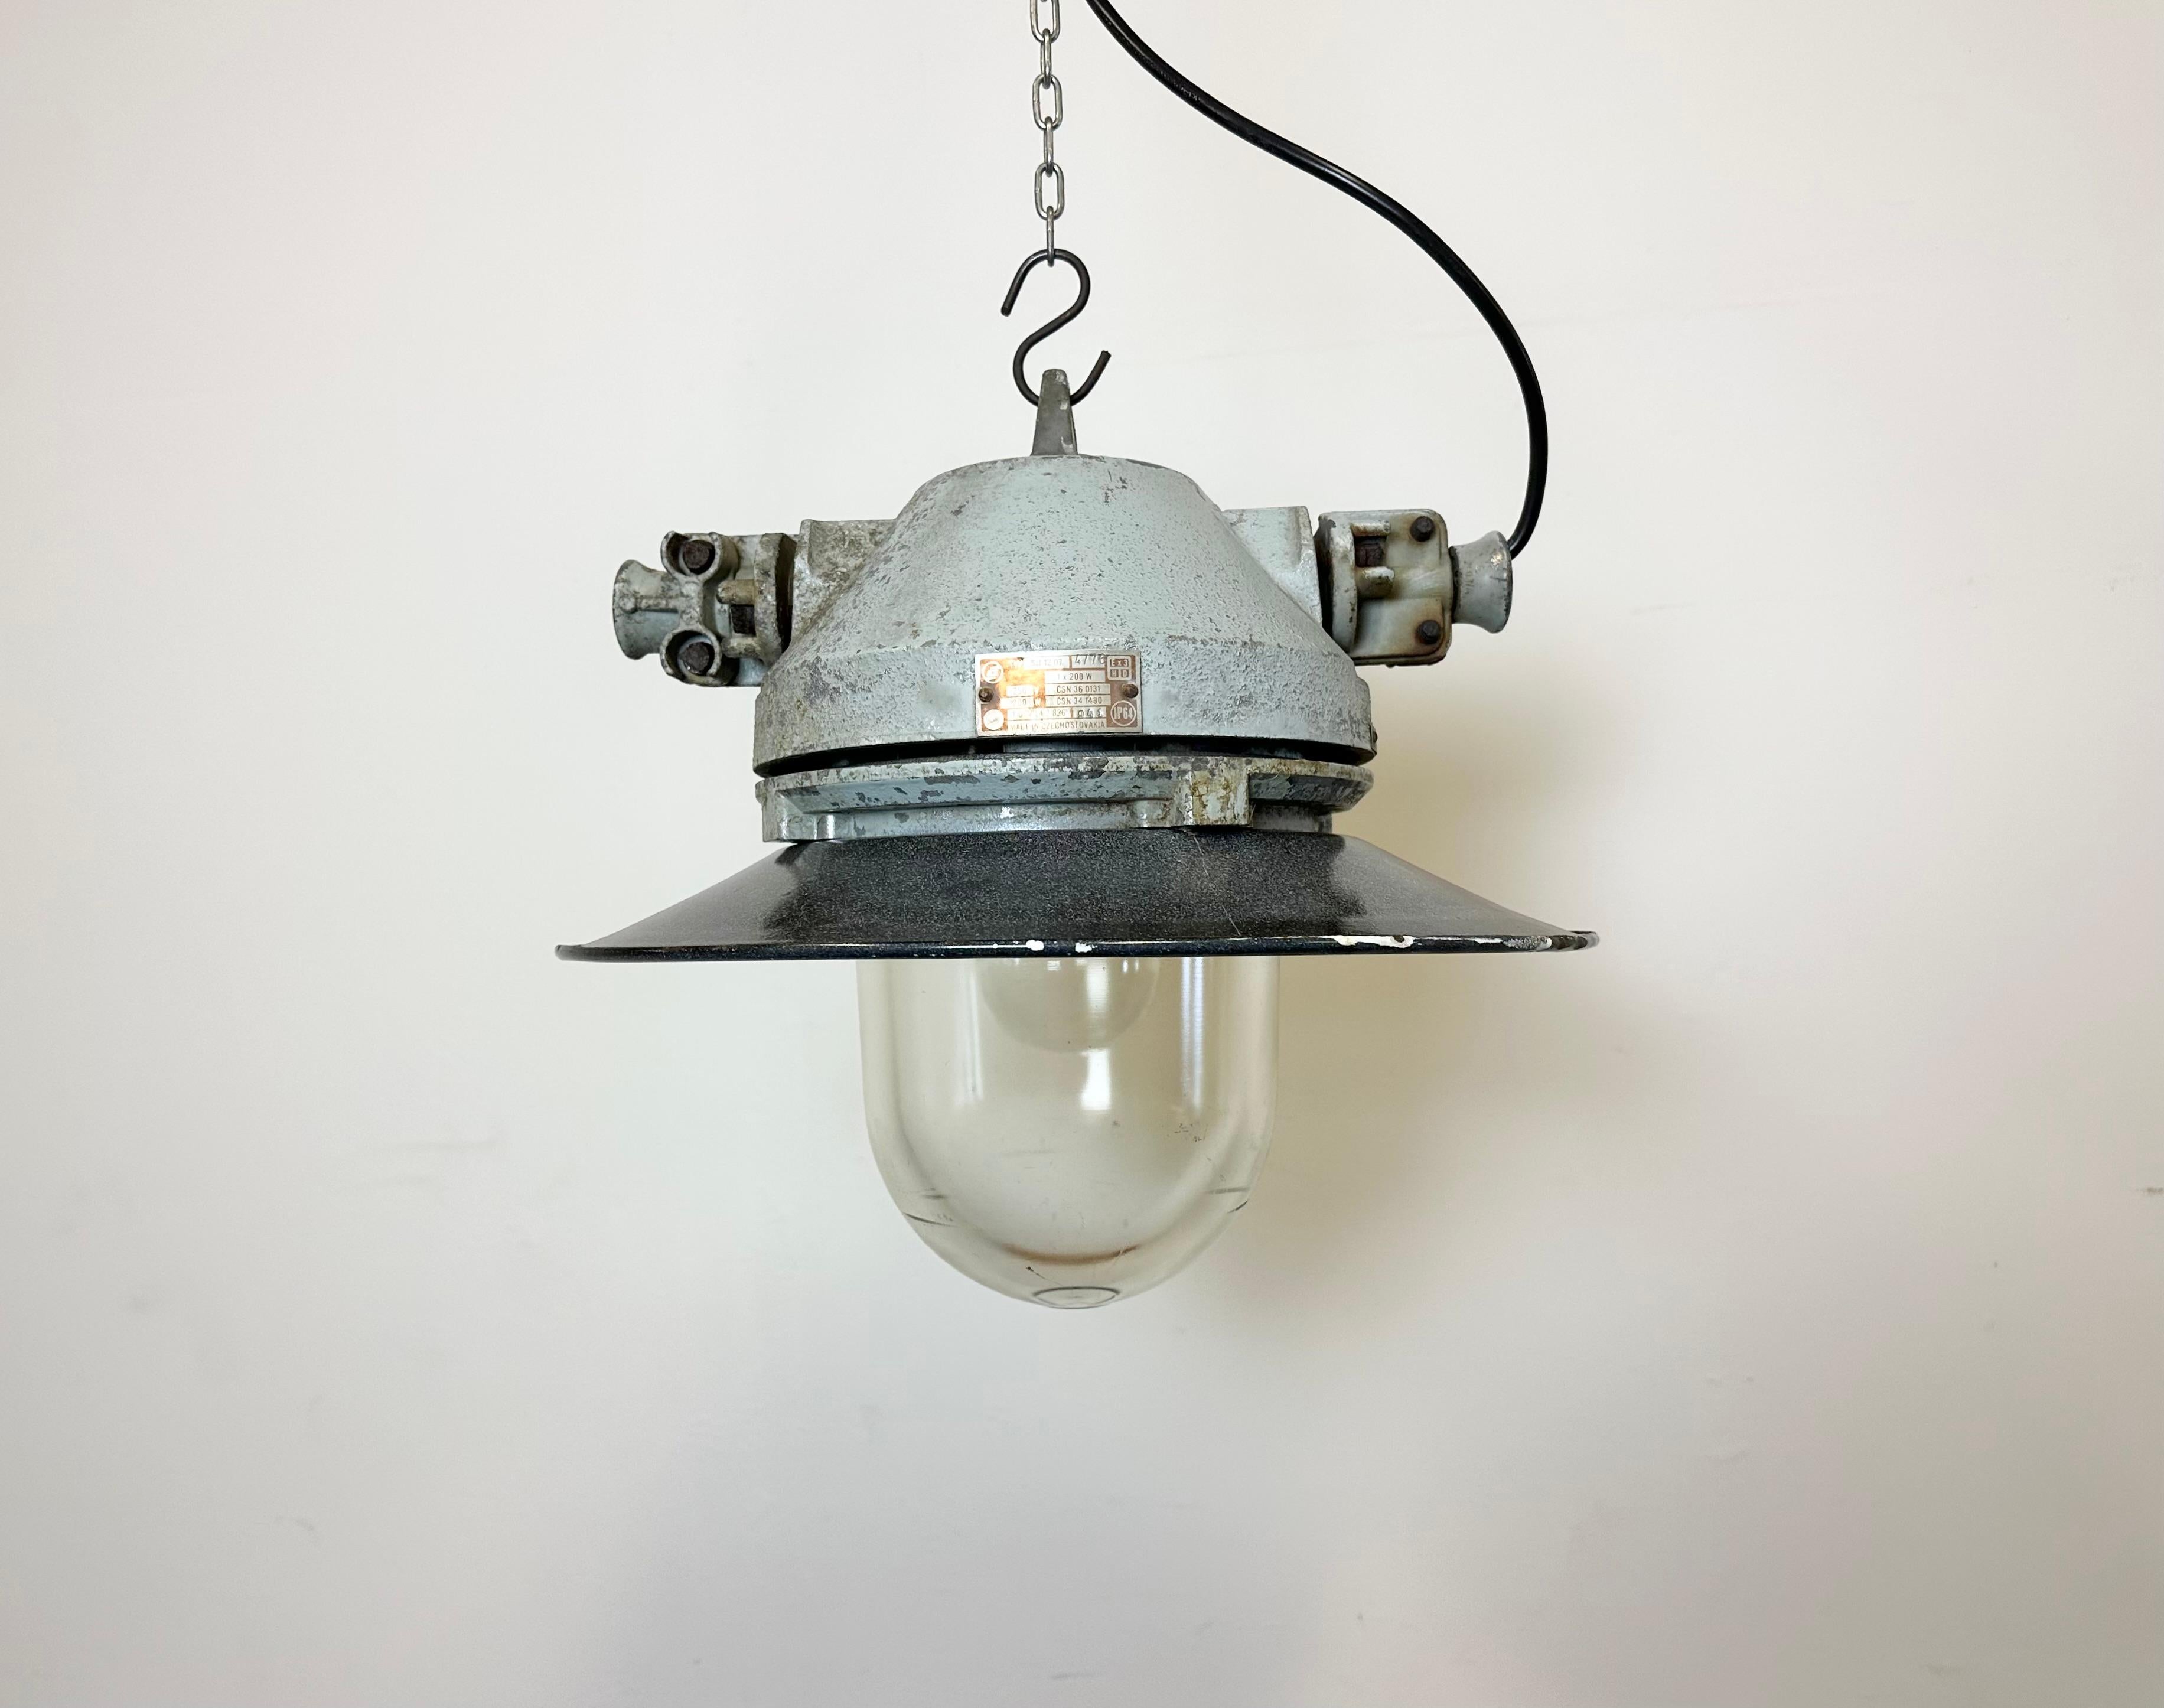 Grey industrial lamp with massive protective glass bulb made by Elektrosvit in former Czechoslovakia during the 1970s.It features a grey cast aluminium body, a clear glass and a grey enameled shade with white interior. Porcelain socket requires E27/